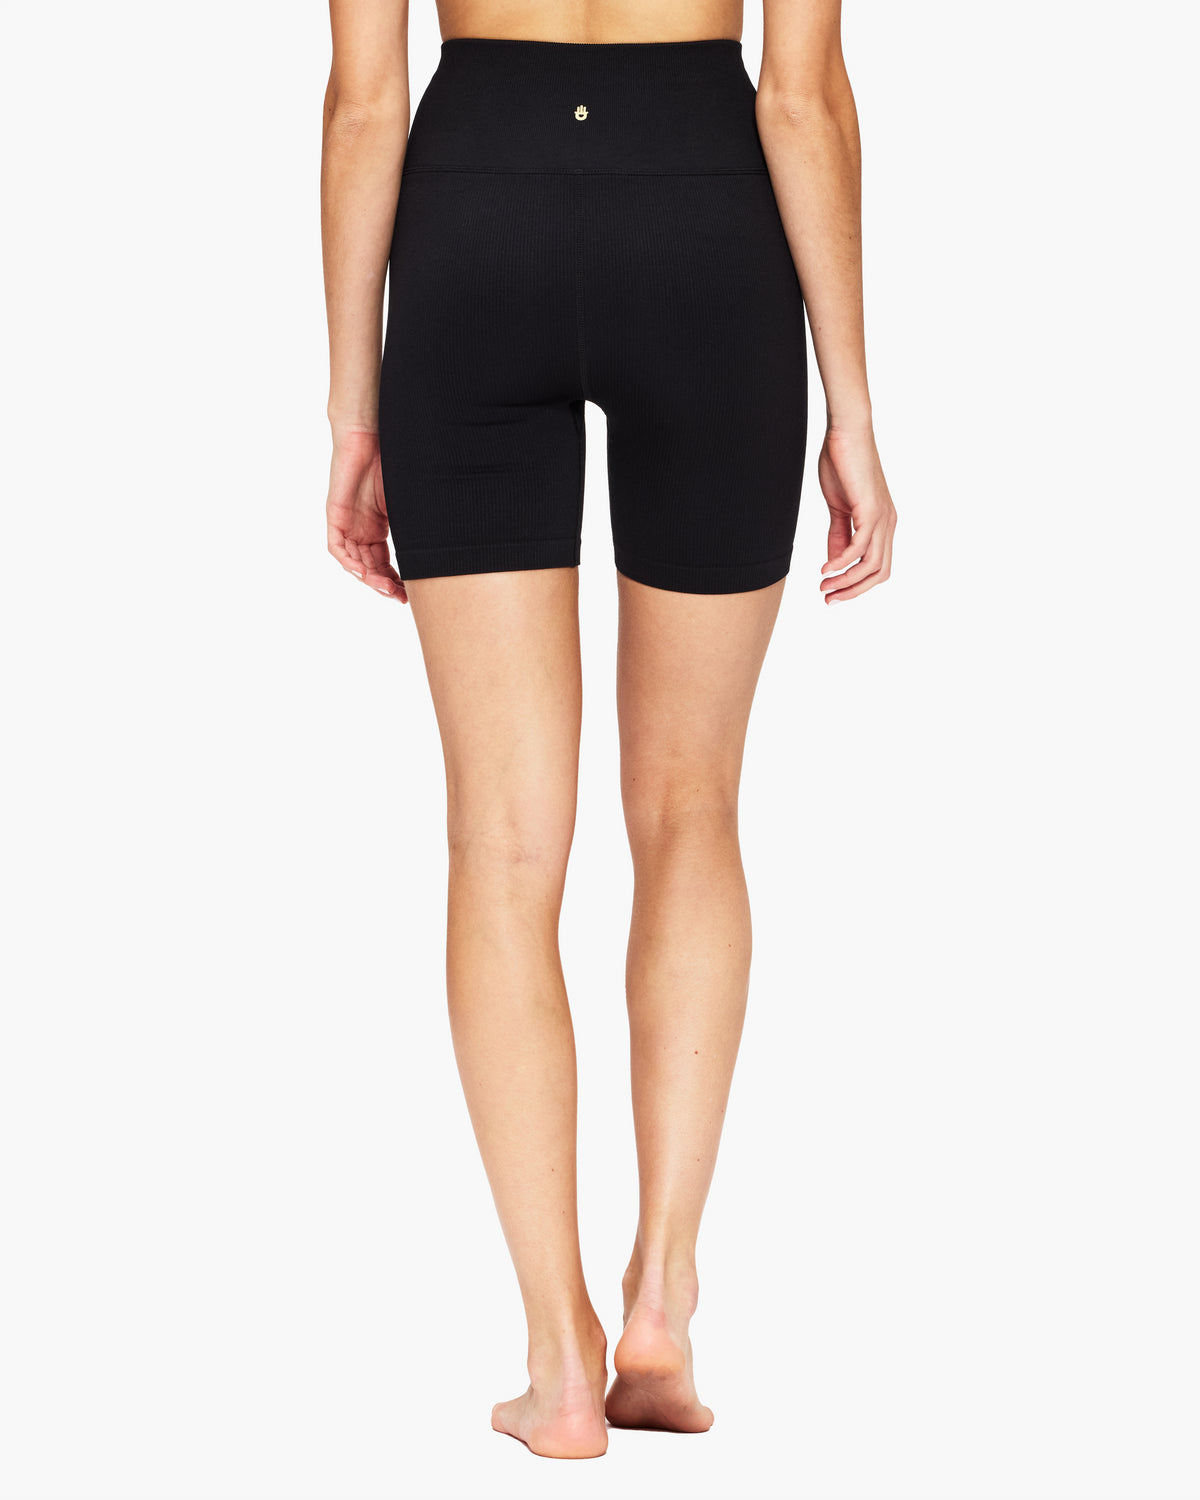 Spacedye At Your Leisure High Waisted 7 Biker Short